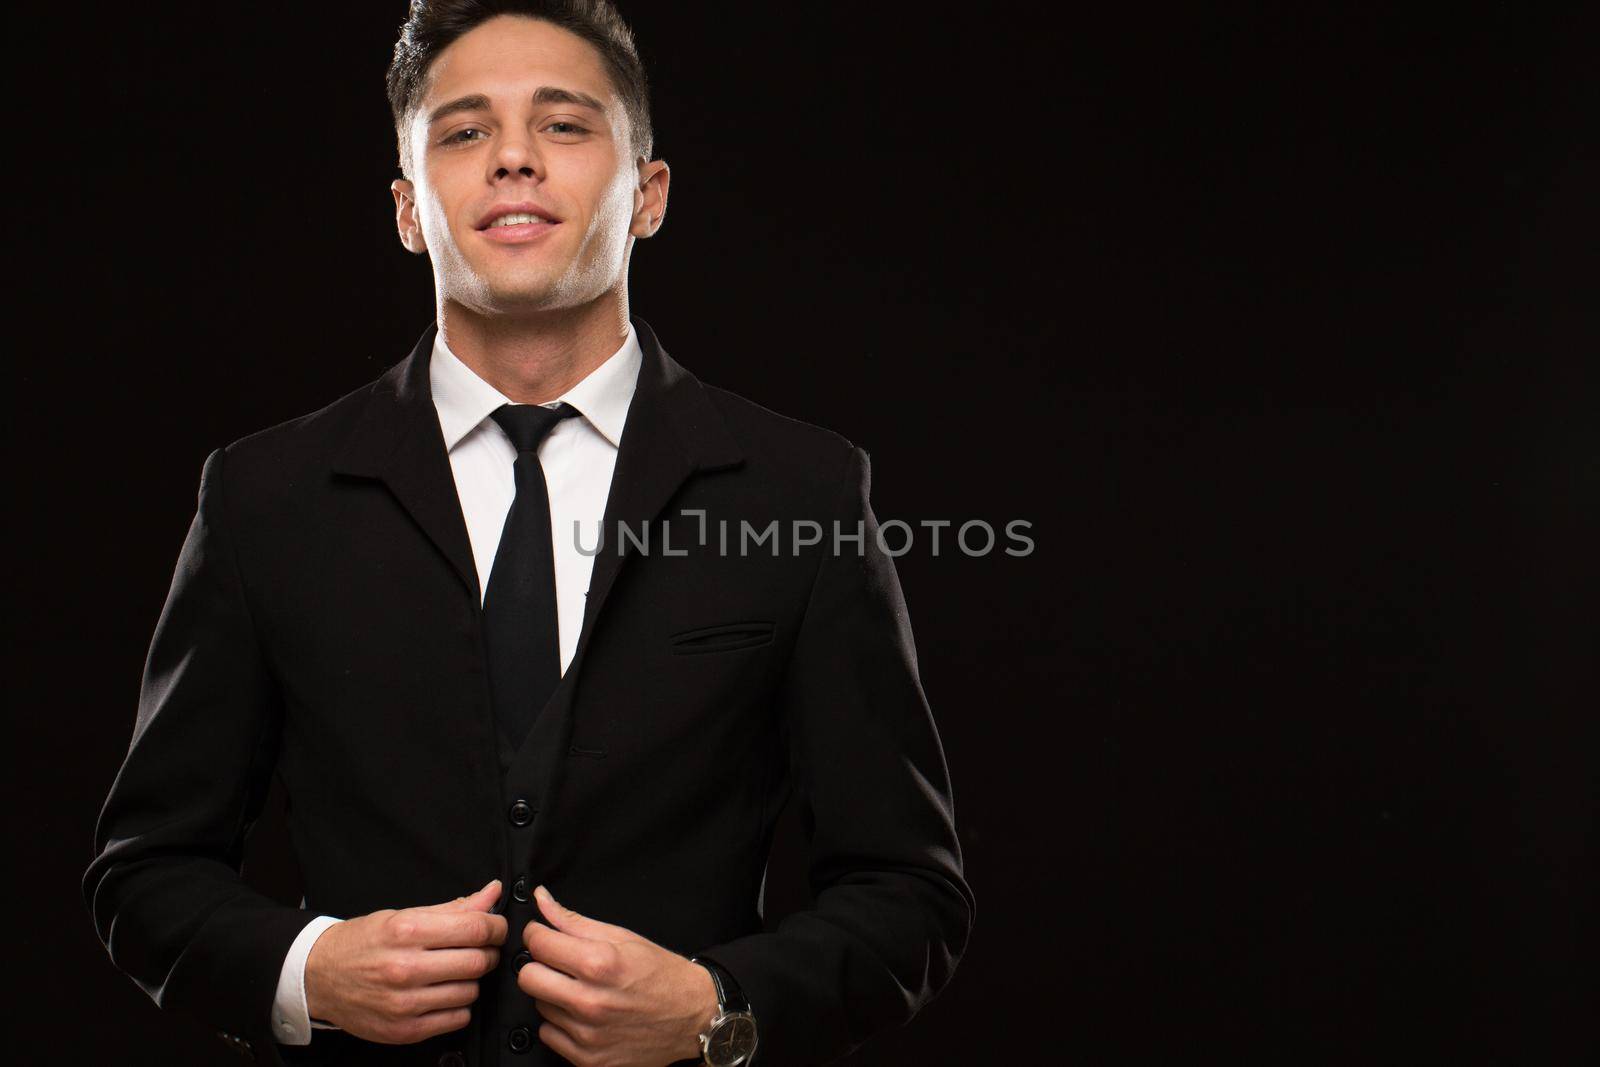 Portrait of a handsome young man wearing elegant black suit and tie posing confidently on black background copyspace masculinity businessman wealth sexy confident suited dressed up stylish